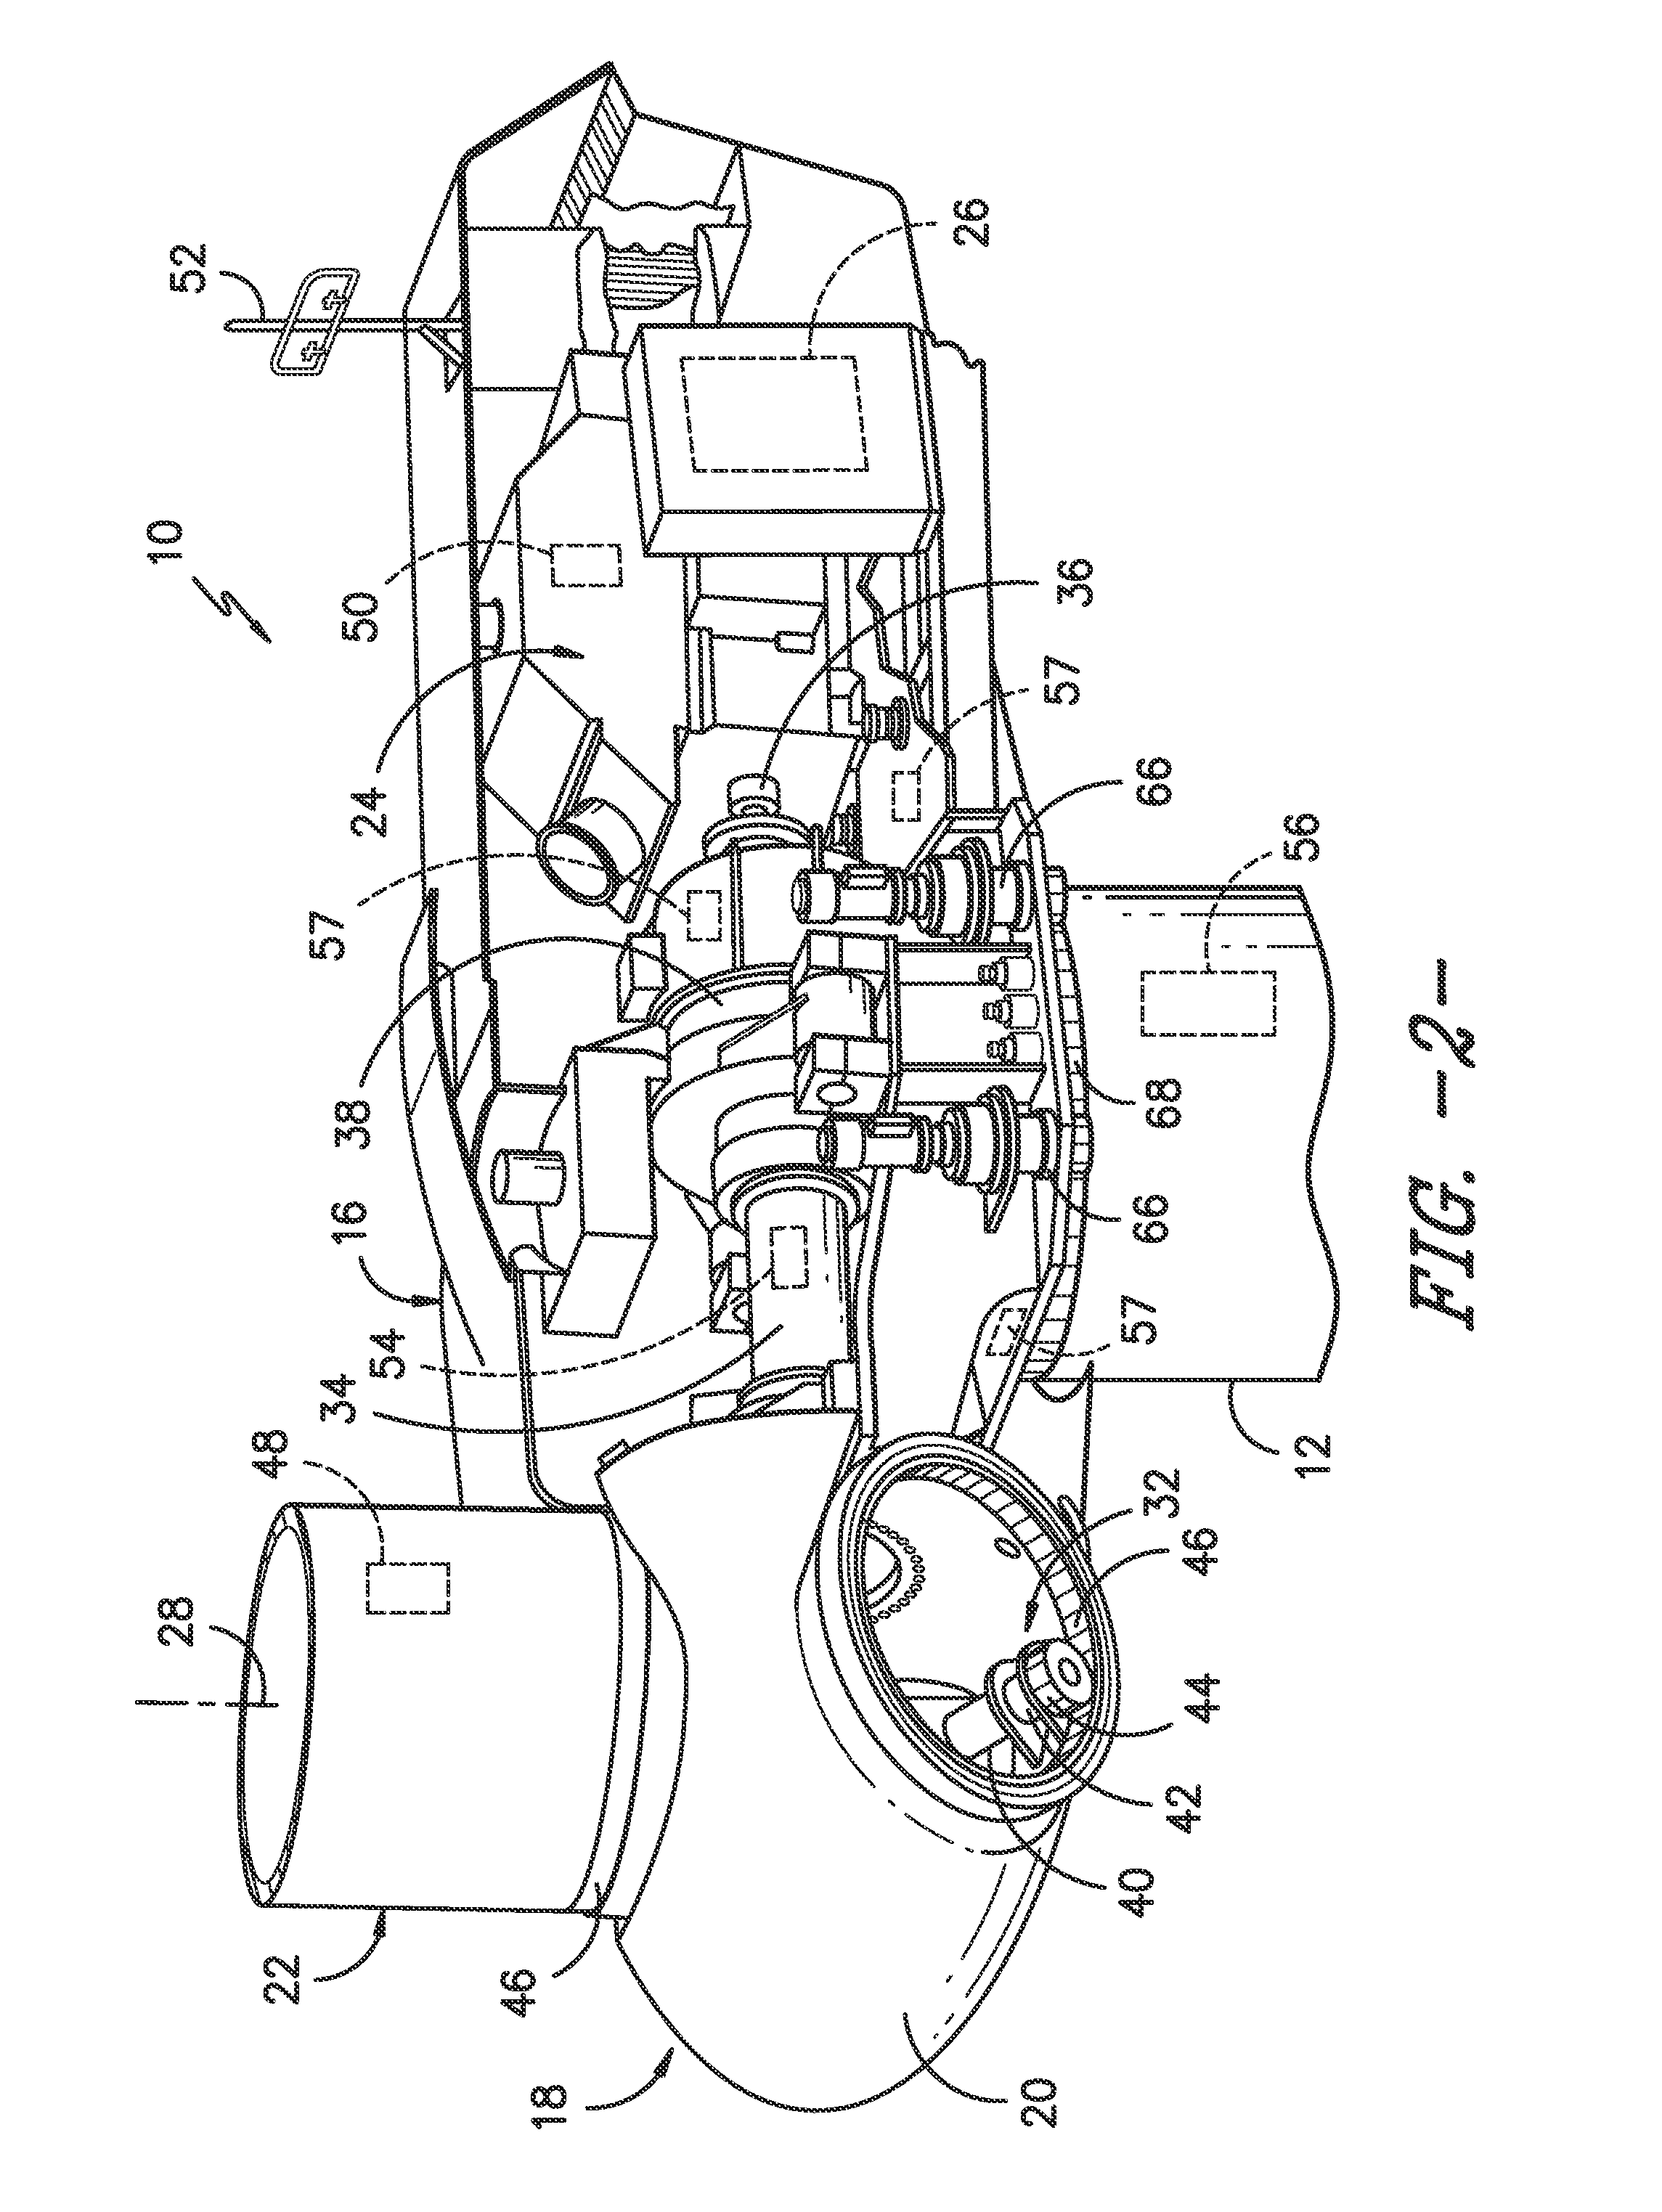 System and Method for Protecting Rotary Machines